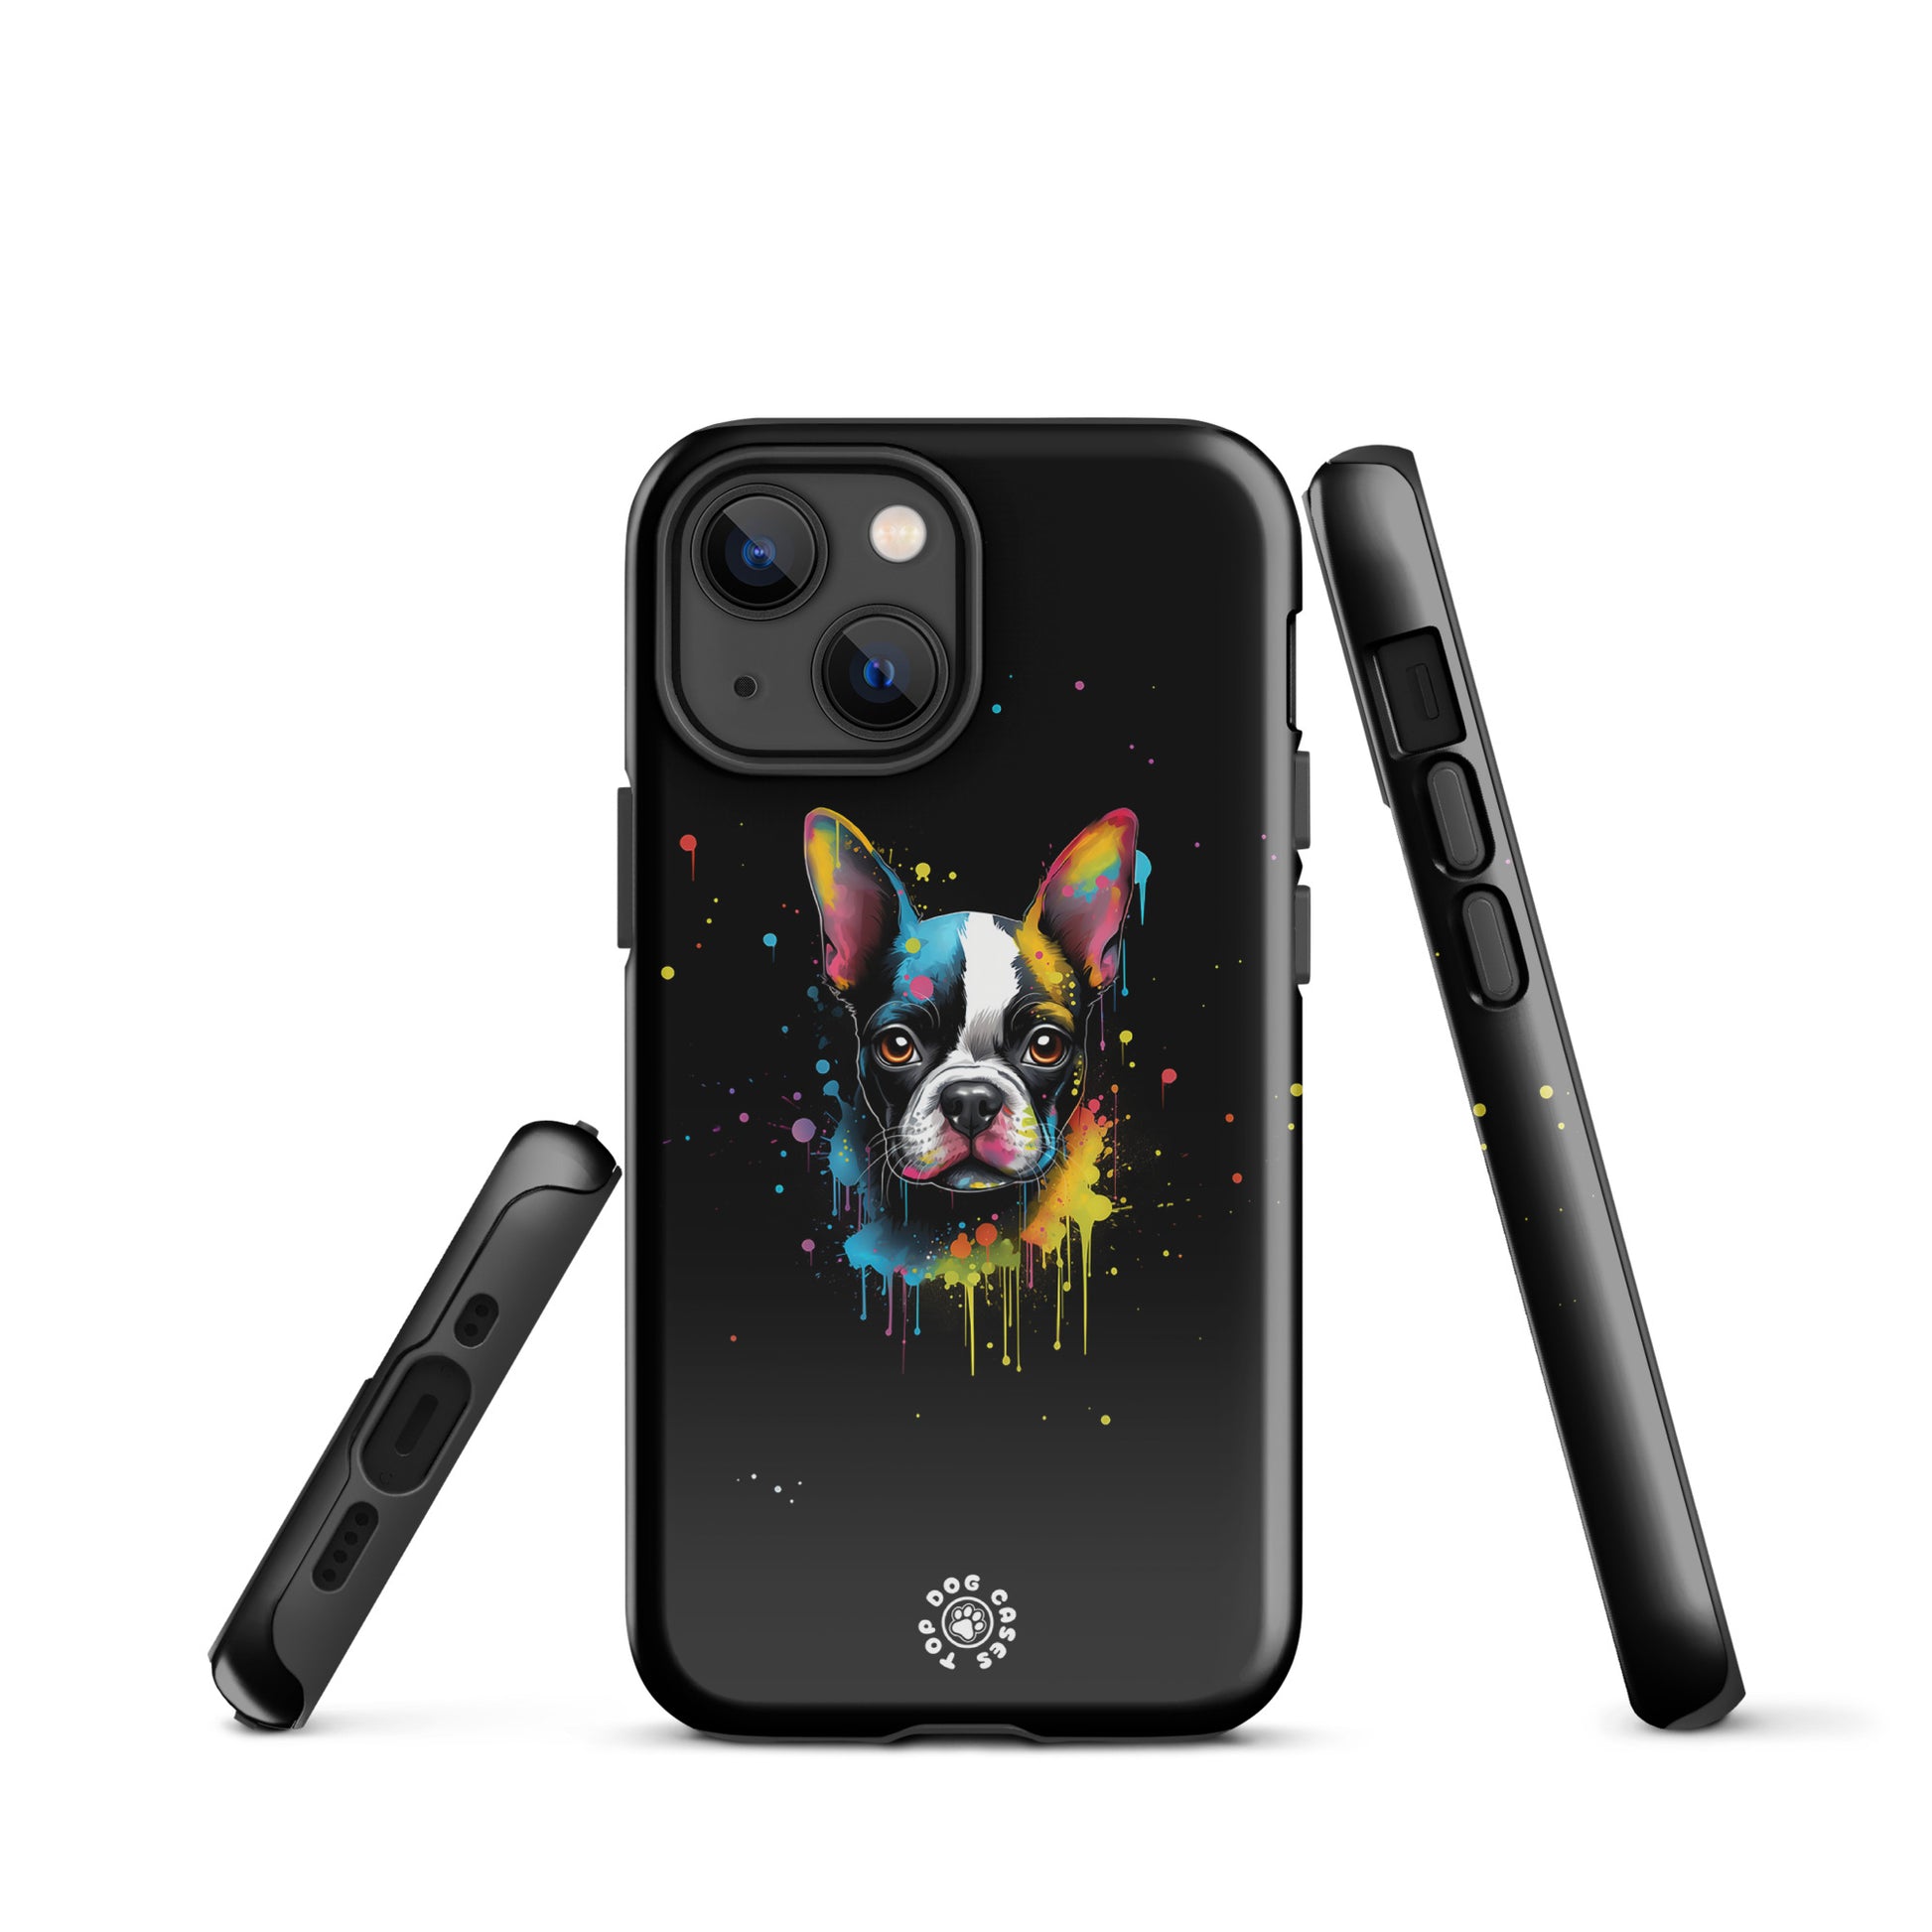 Boston Terrier - Colorful Phone Case - iPhone Case - Top Dog Cases - #BostonTerrier, #ColorfulPhoneCases, #iPhone, #iPhone11, #iphone11case, #iPhone12, #iPhone12case, #iPhone13, #iPhone13case, #iPhone13DogCase, #iPhone13Mini, #iPhone13Pro, #iPhone13ProMax, #iPhone14, #iPhone14case, #iPhone14DogCase, #iPhone14Plus, #iPhone14Pluscase, #iPhone14Pro, #iPhone14ProMax, #iPhone14ProMaxCase, #iPhone15, #iPhone15case, #iPhonecase, #iphonedogcase